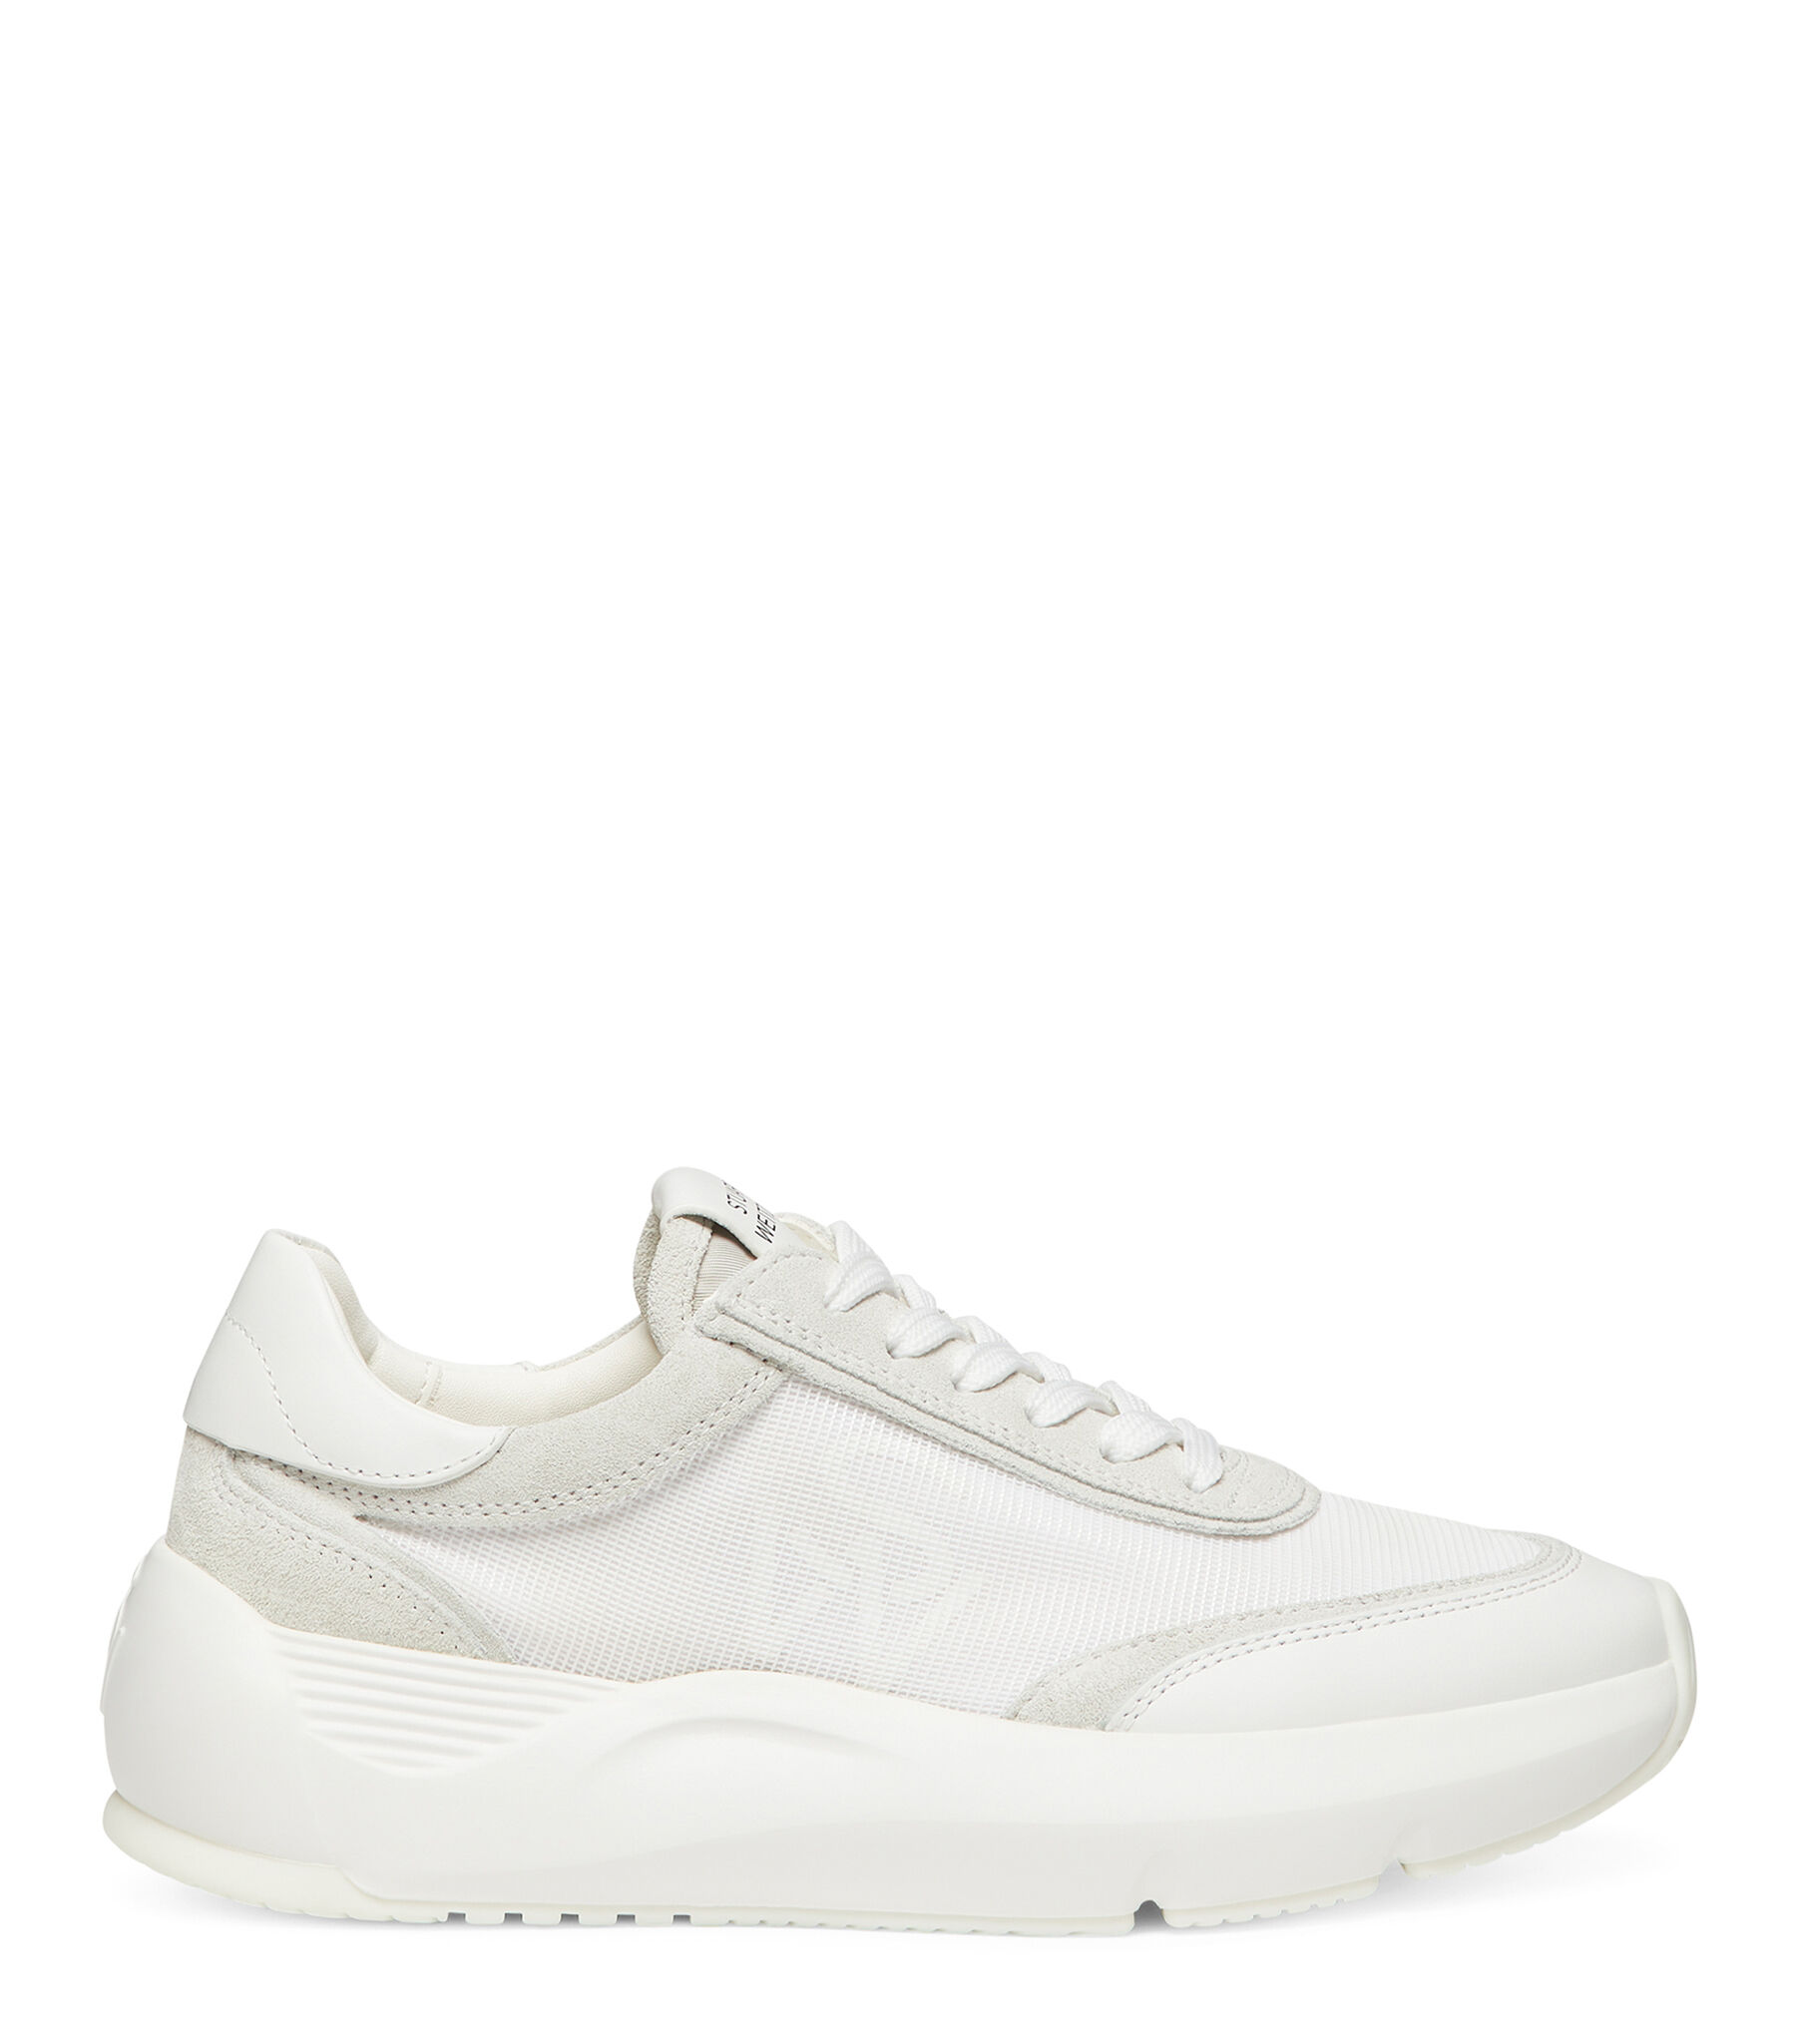 Stuart Weitzman Sw Glide Lace-up Sneaker - Donna Sneakers White 37